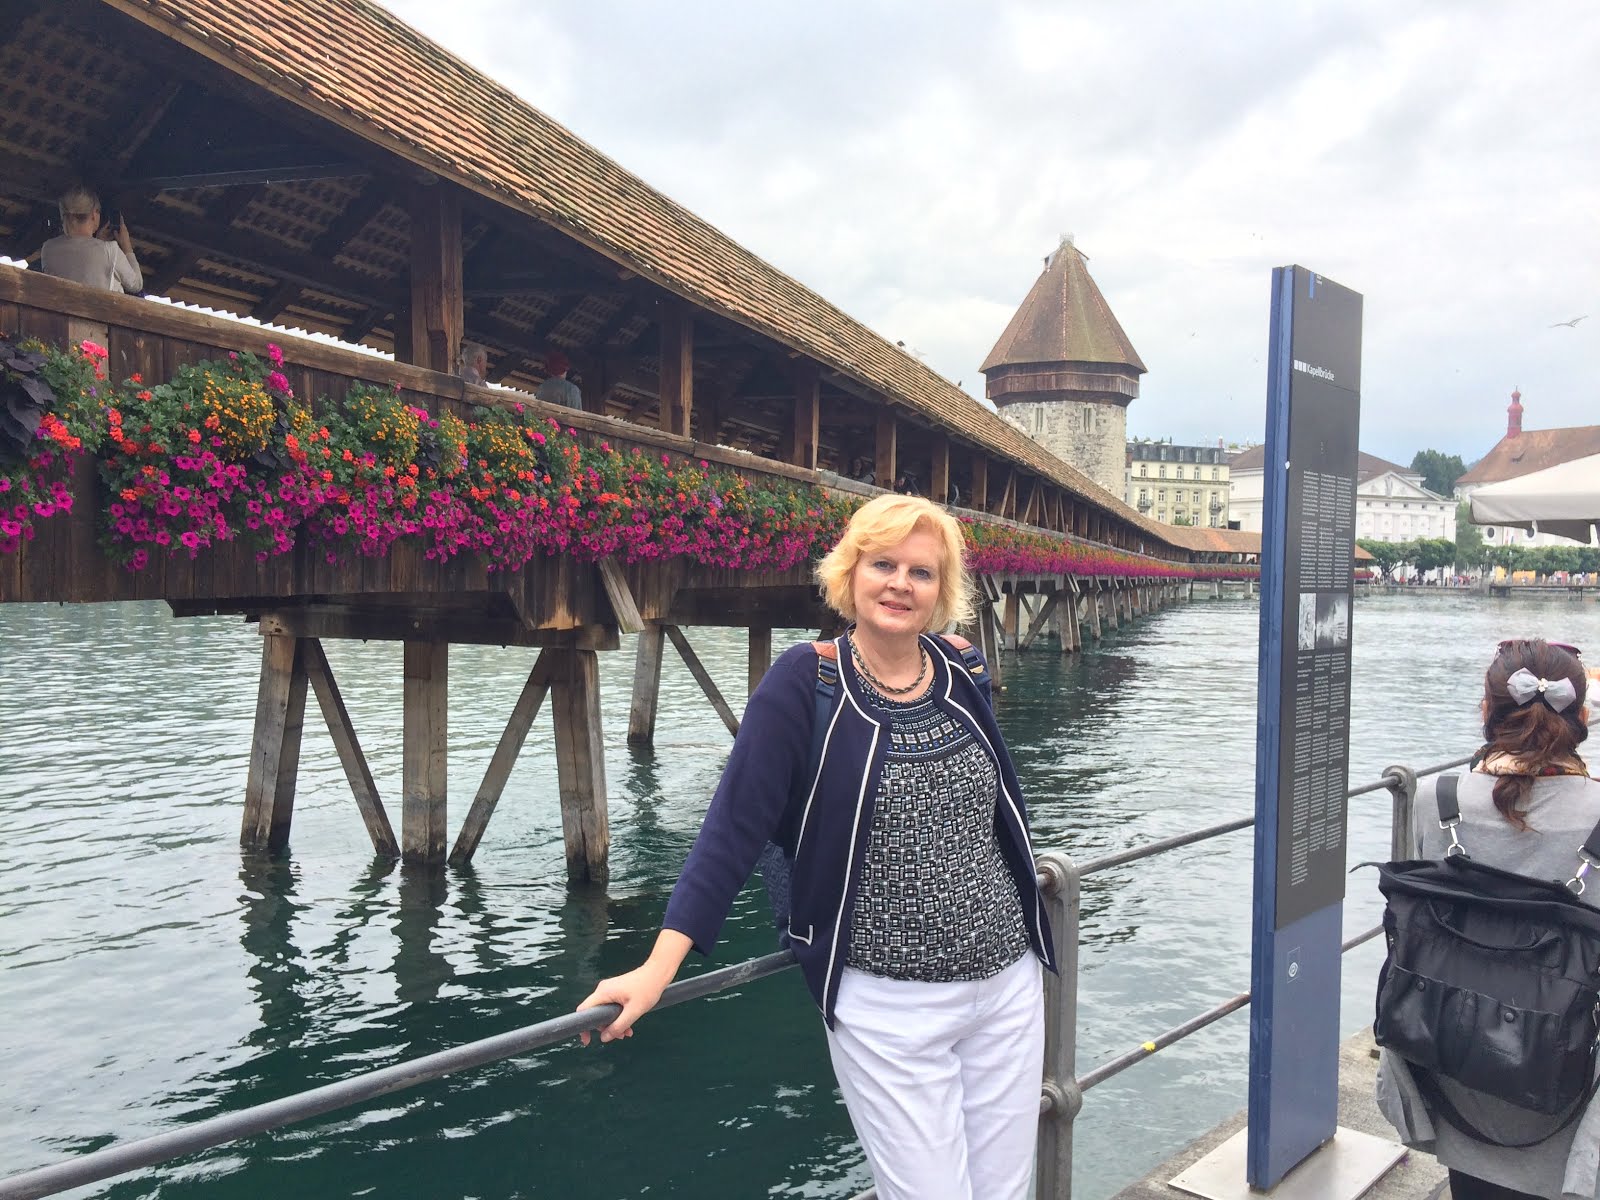 At the Chappel Bridge in Lucerne